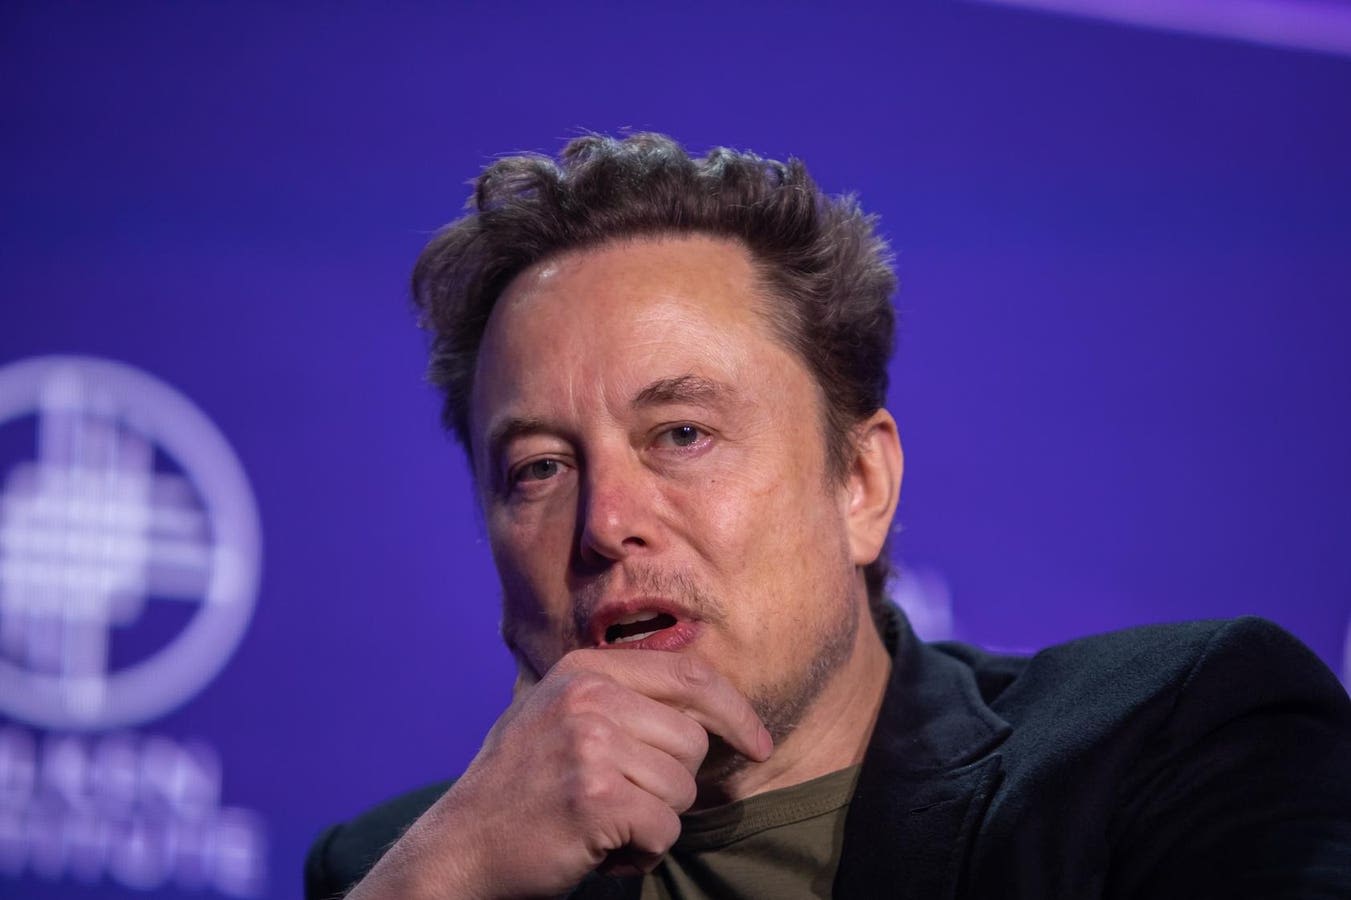 Elon Musk Denies Discussing Trump White House Role—As Trump Reportedly Eyes Recruiting These Billionaires